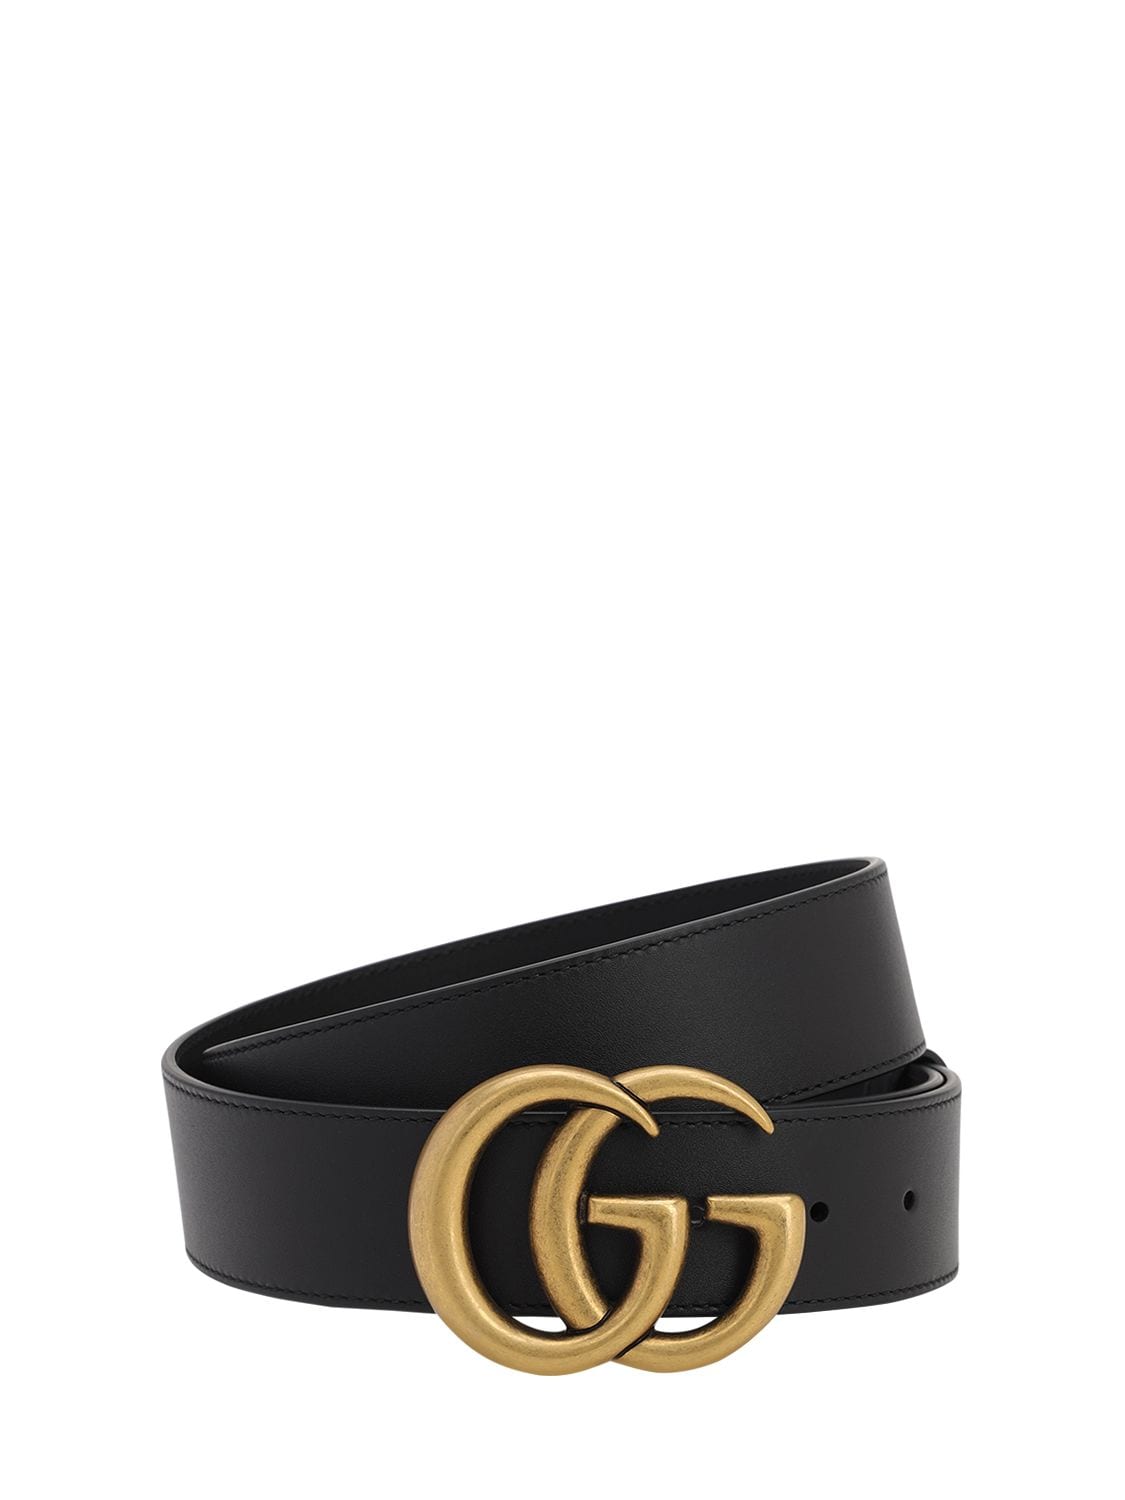 40mm Gg Gold Buckle Leather Belt